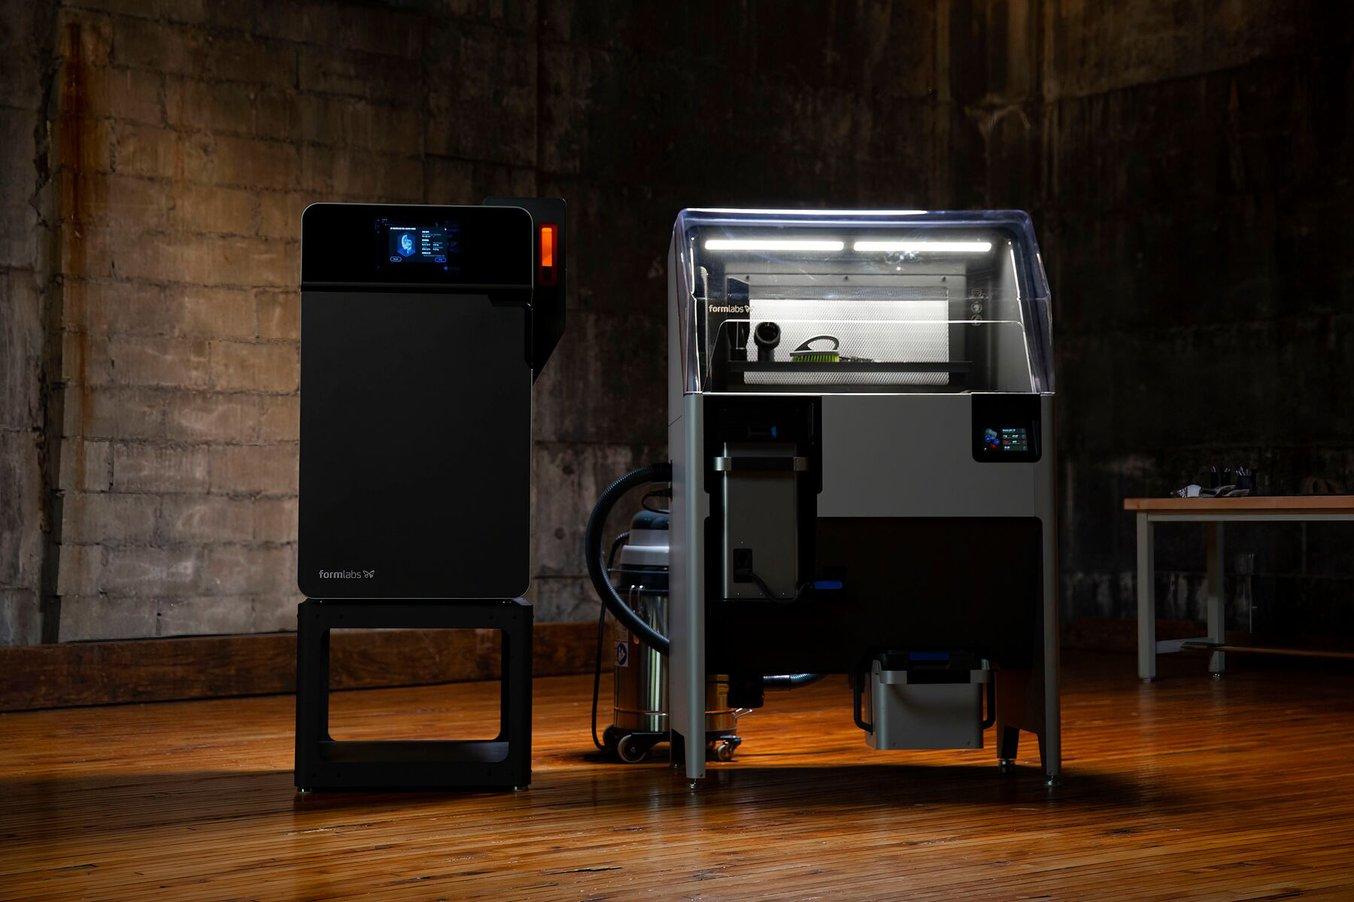 Formlabs SLS 3D printer and post-processing solution: Fuse 1+ 30W and Fuse Sift